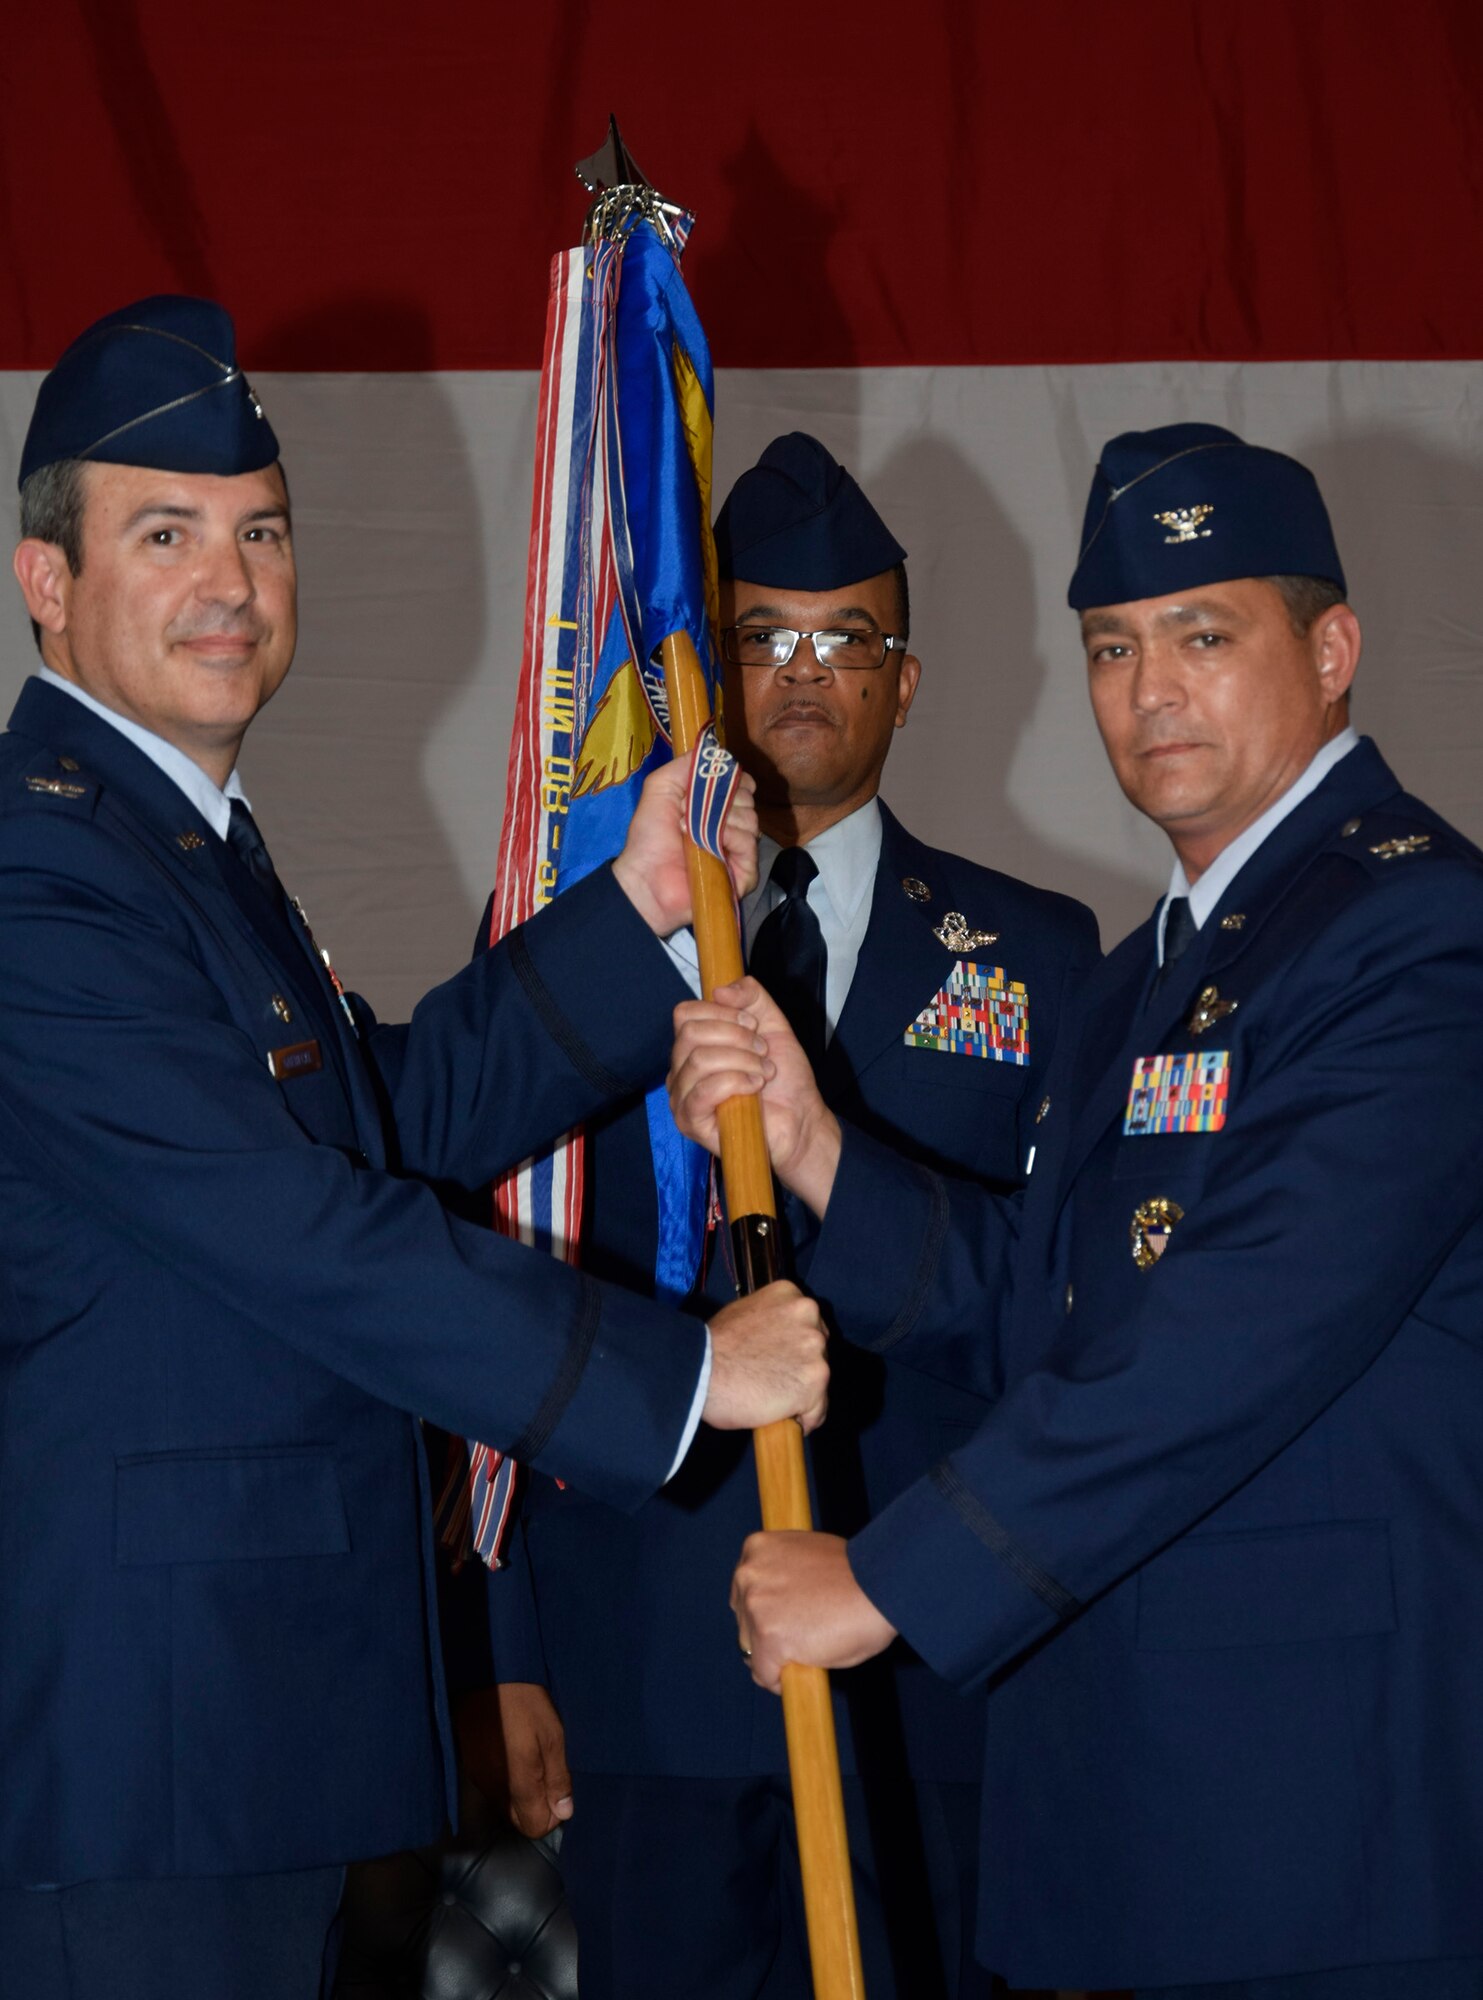 Col. Richard Land III accepts the 552nd Operations Group guidon from Col. David Gaedecke, 552nd Air Control Wing commander, during a change of command ceremony held July 8. Awaiting the guidon is Chief Master Sgt. Delano Barney, 552nd OG superintendent. (Air Force photo by Ron Mullan)